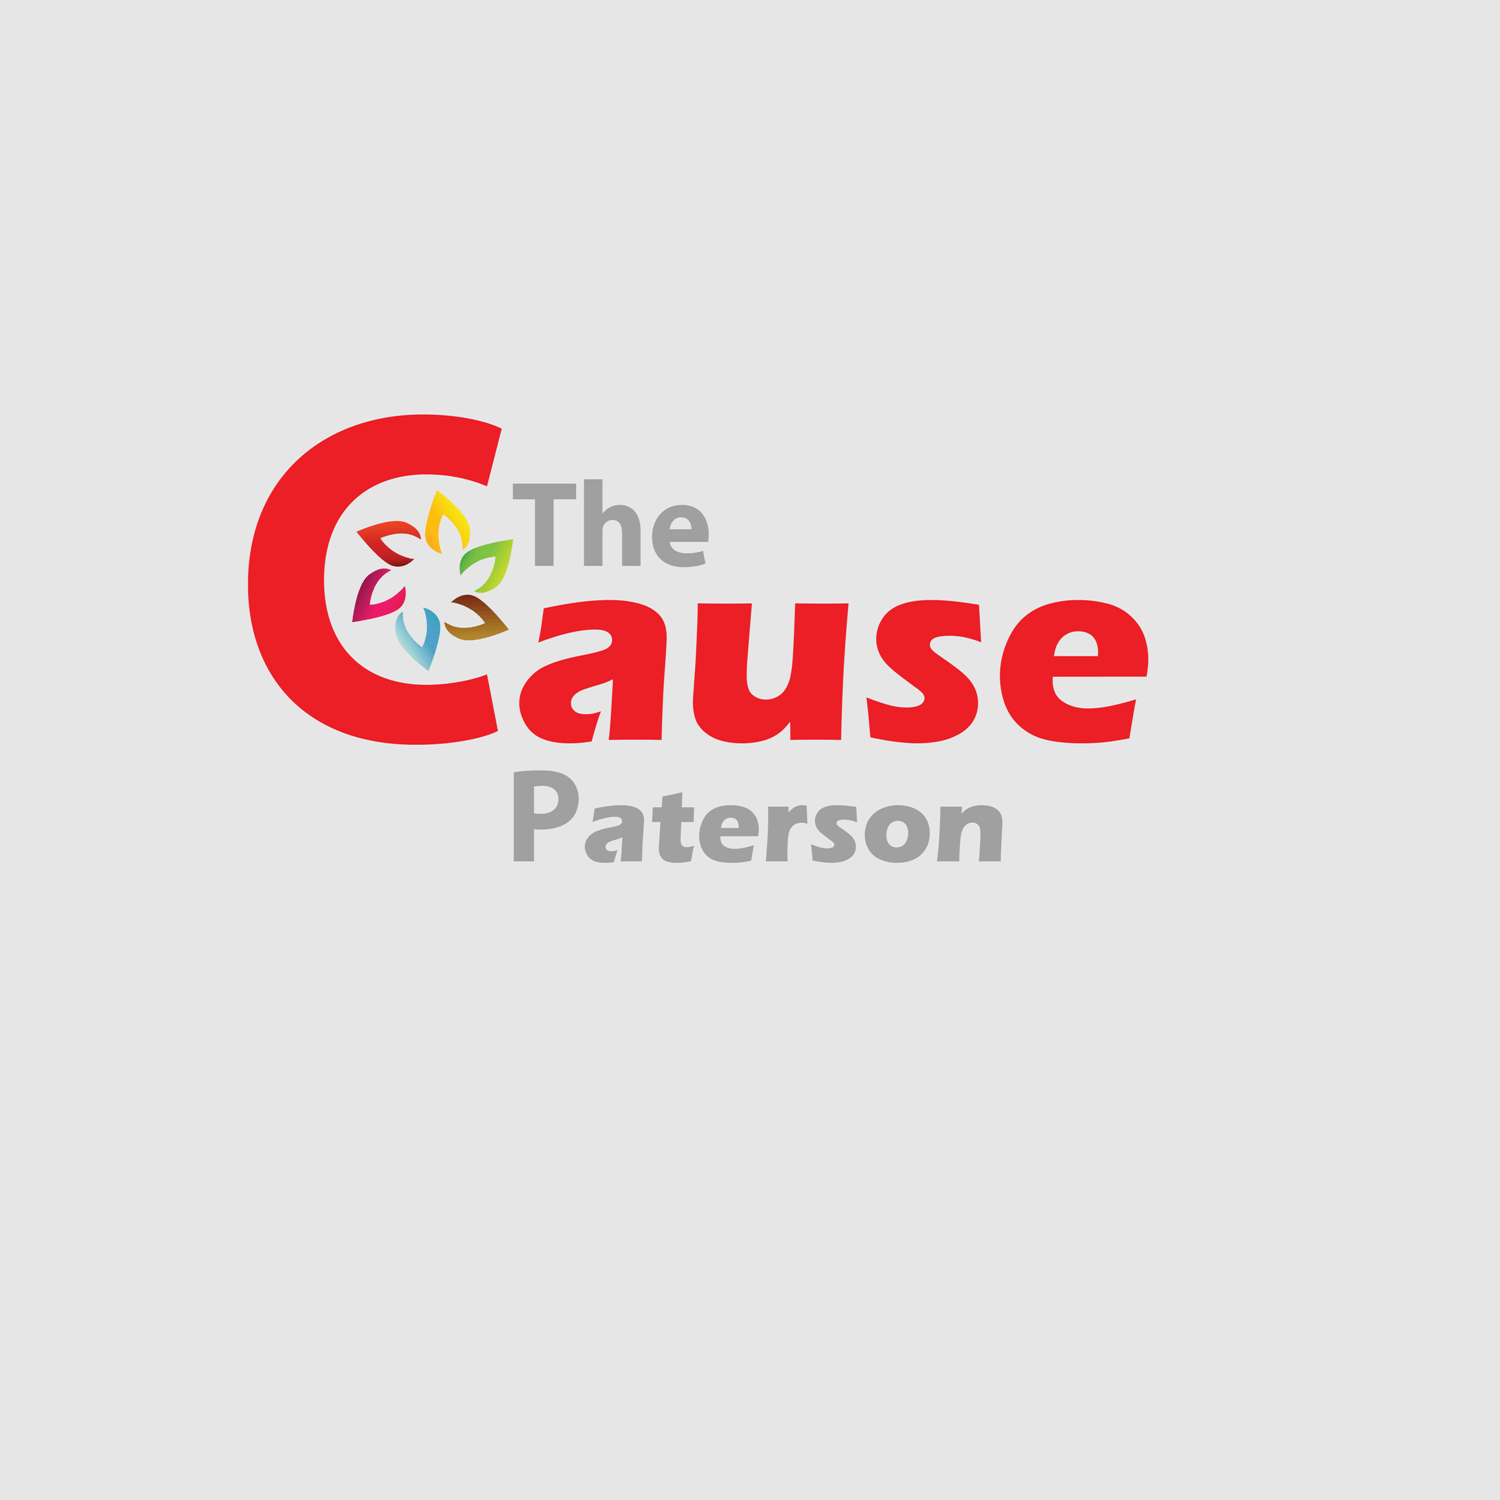 Paterson Logo - Masculine, Serious Logo Design for The Cause Paterson